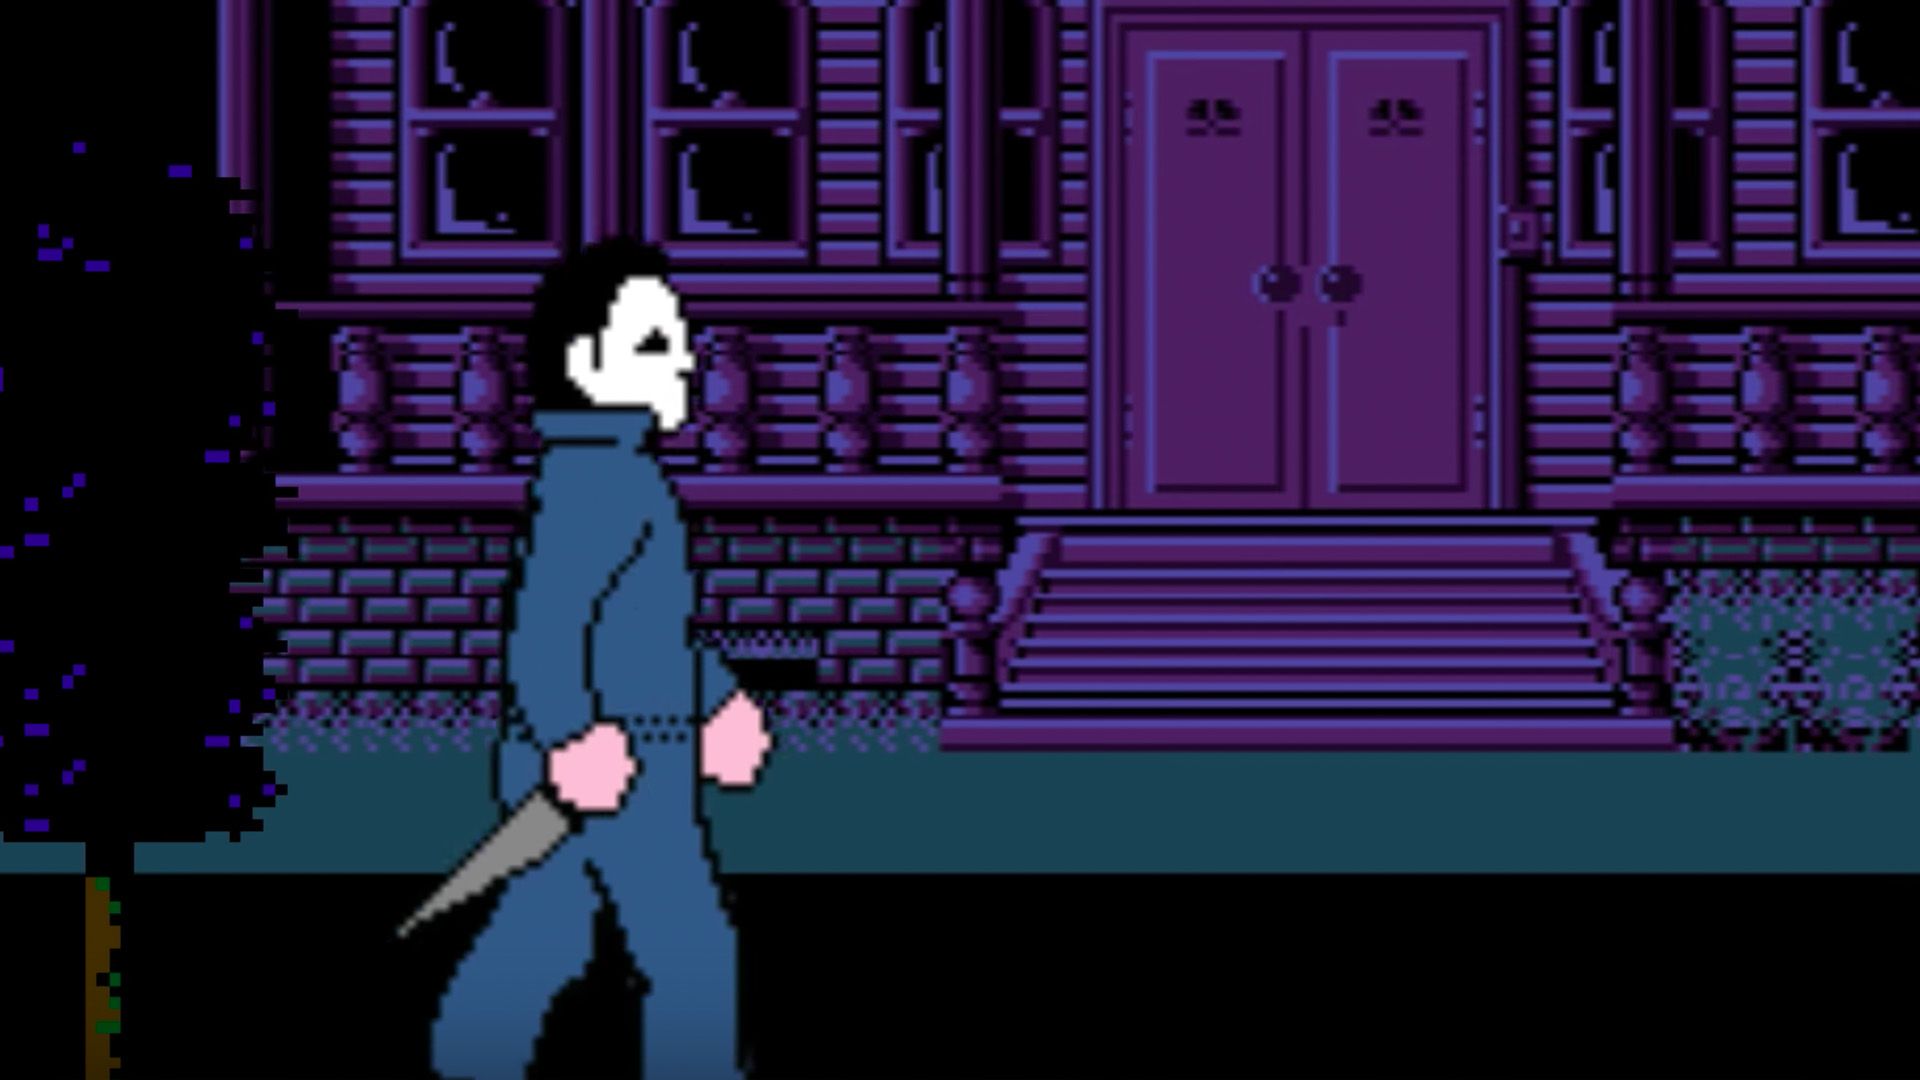 Here's What John Carpenter's HALLOWEEN Would Look Like As An 8 Bit Video Game